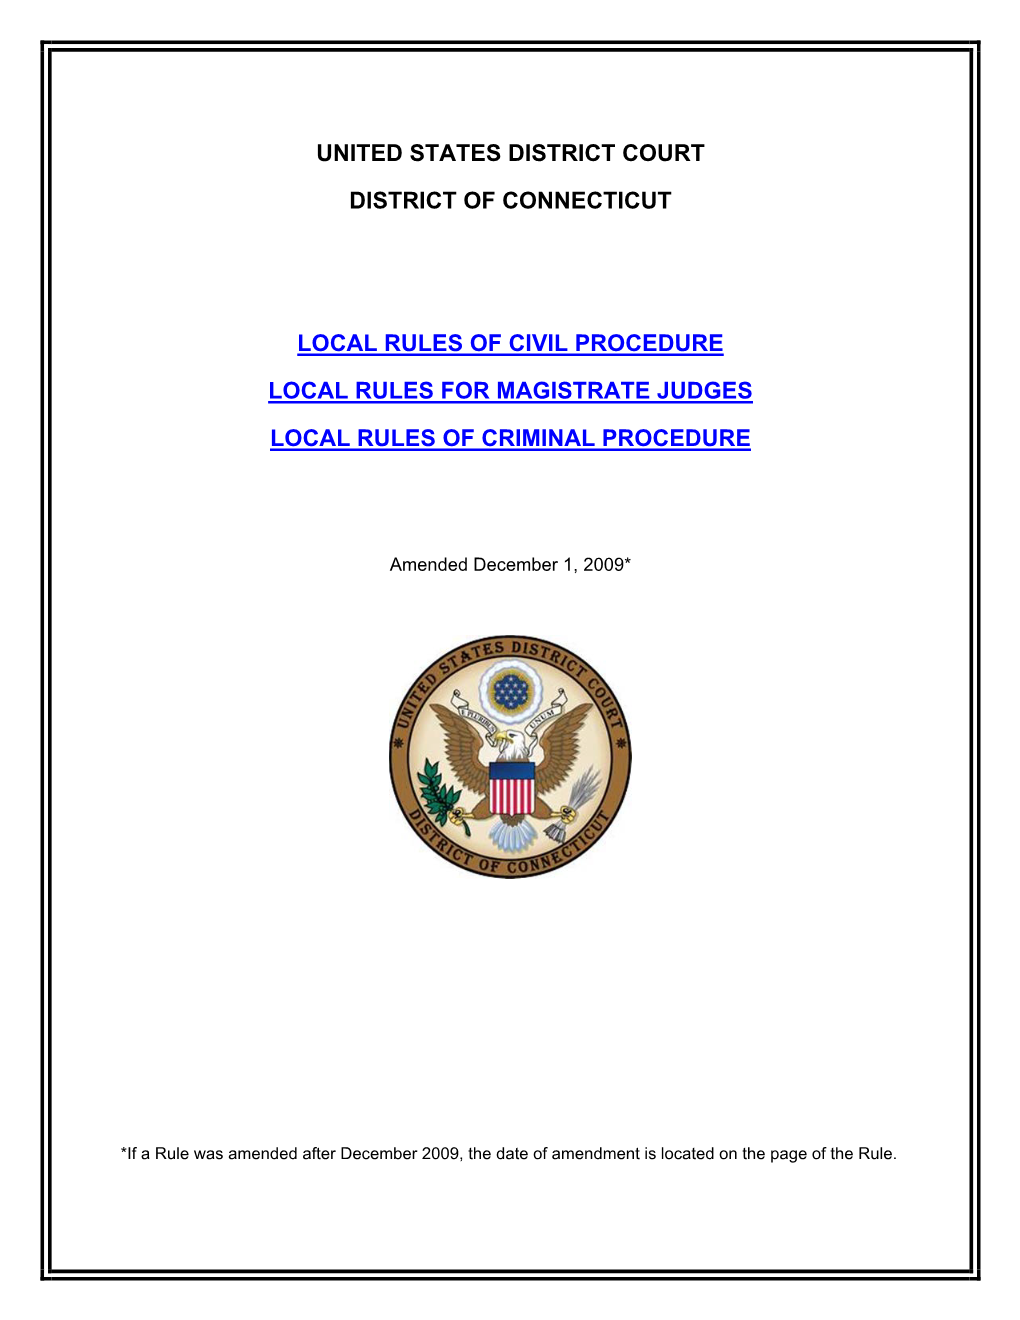 United States District Court of Connecticut Local Rules